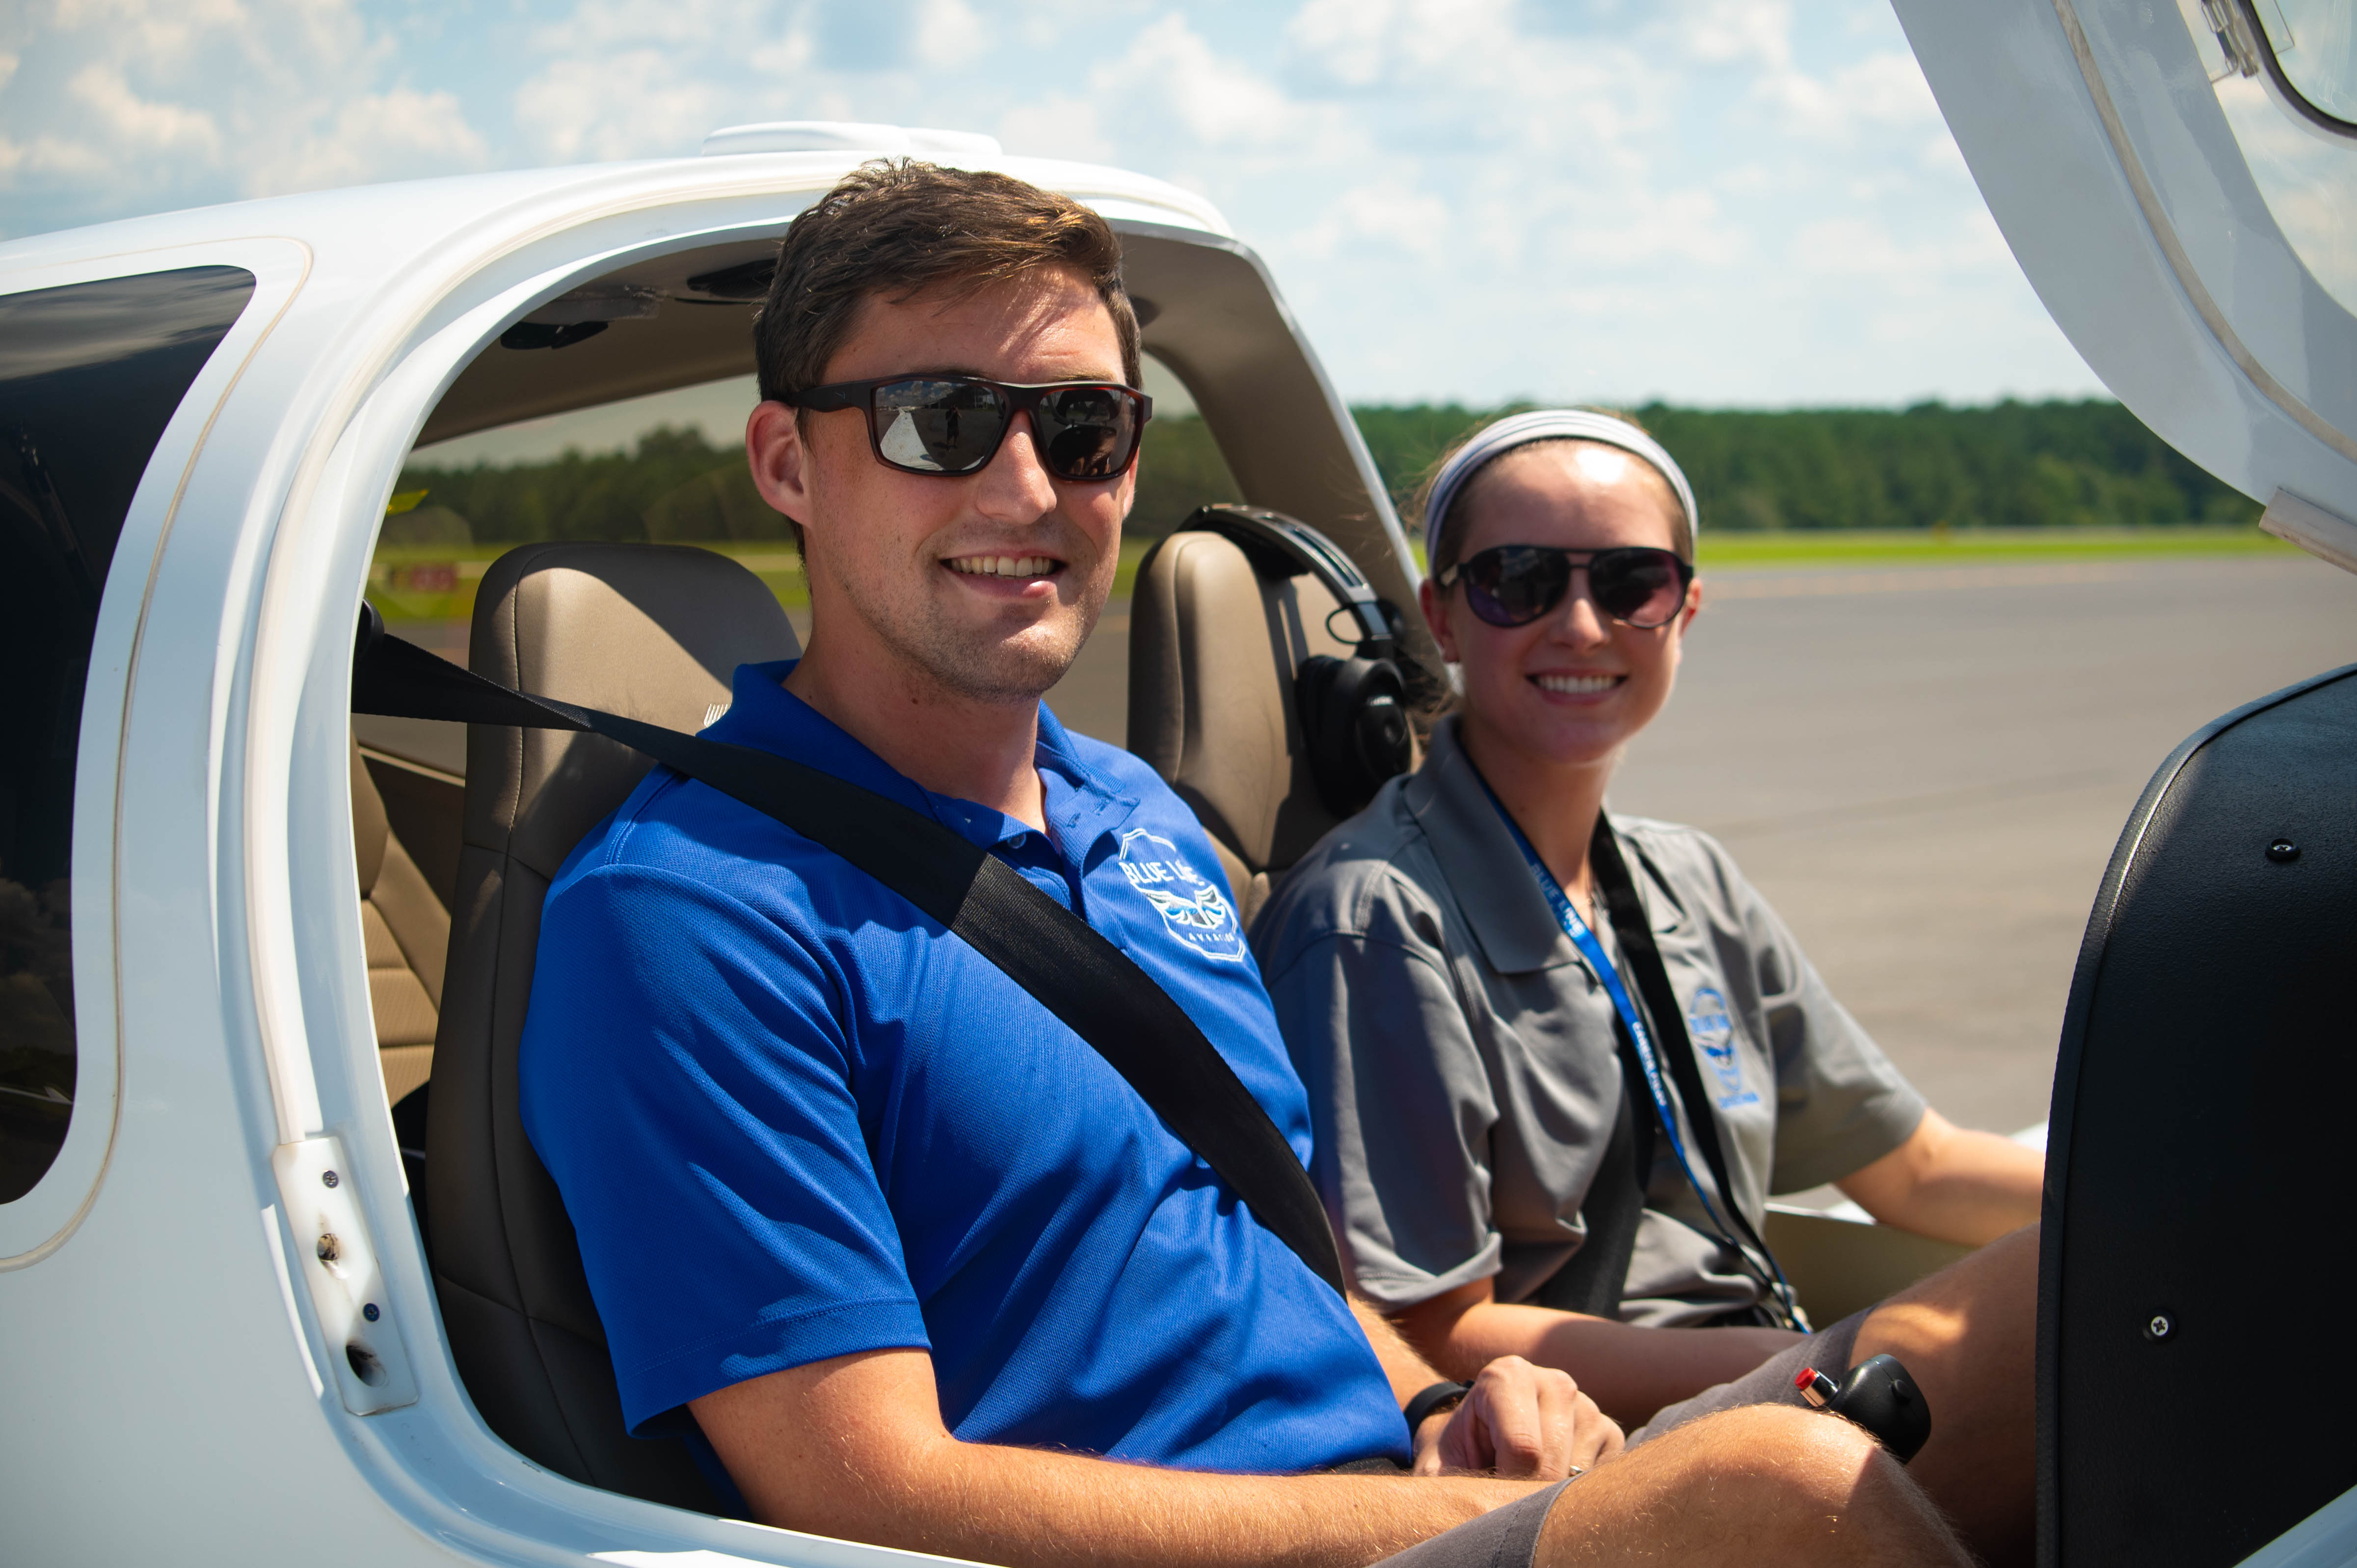 An certified flight instructor accompanies a student in an small airplane